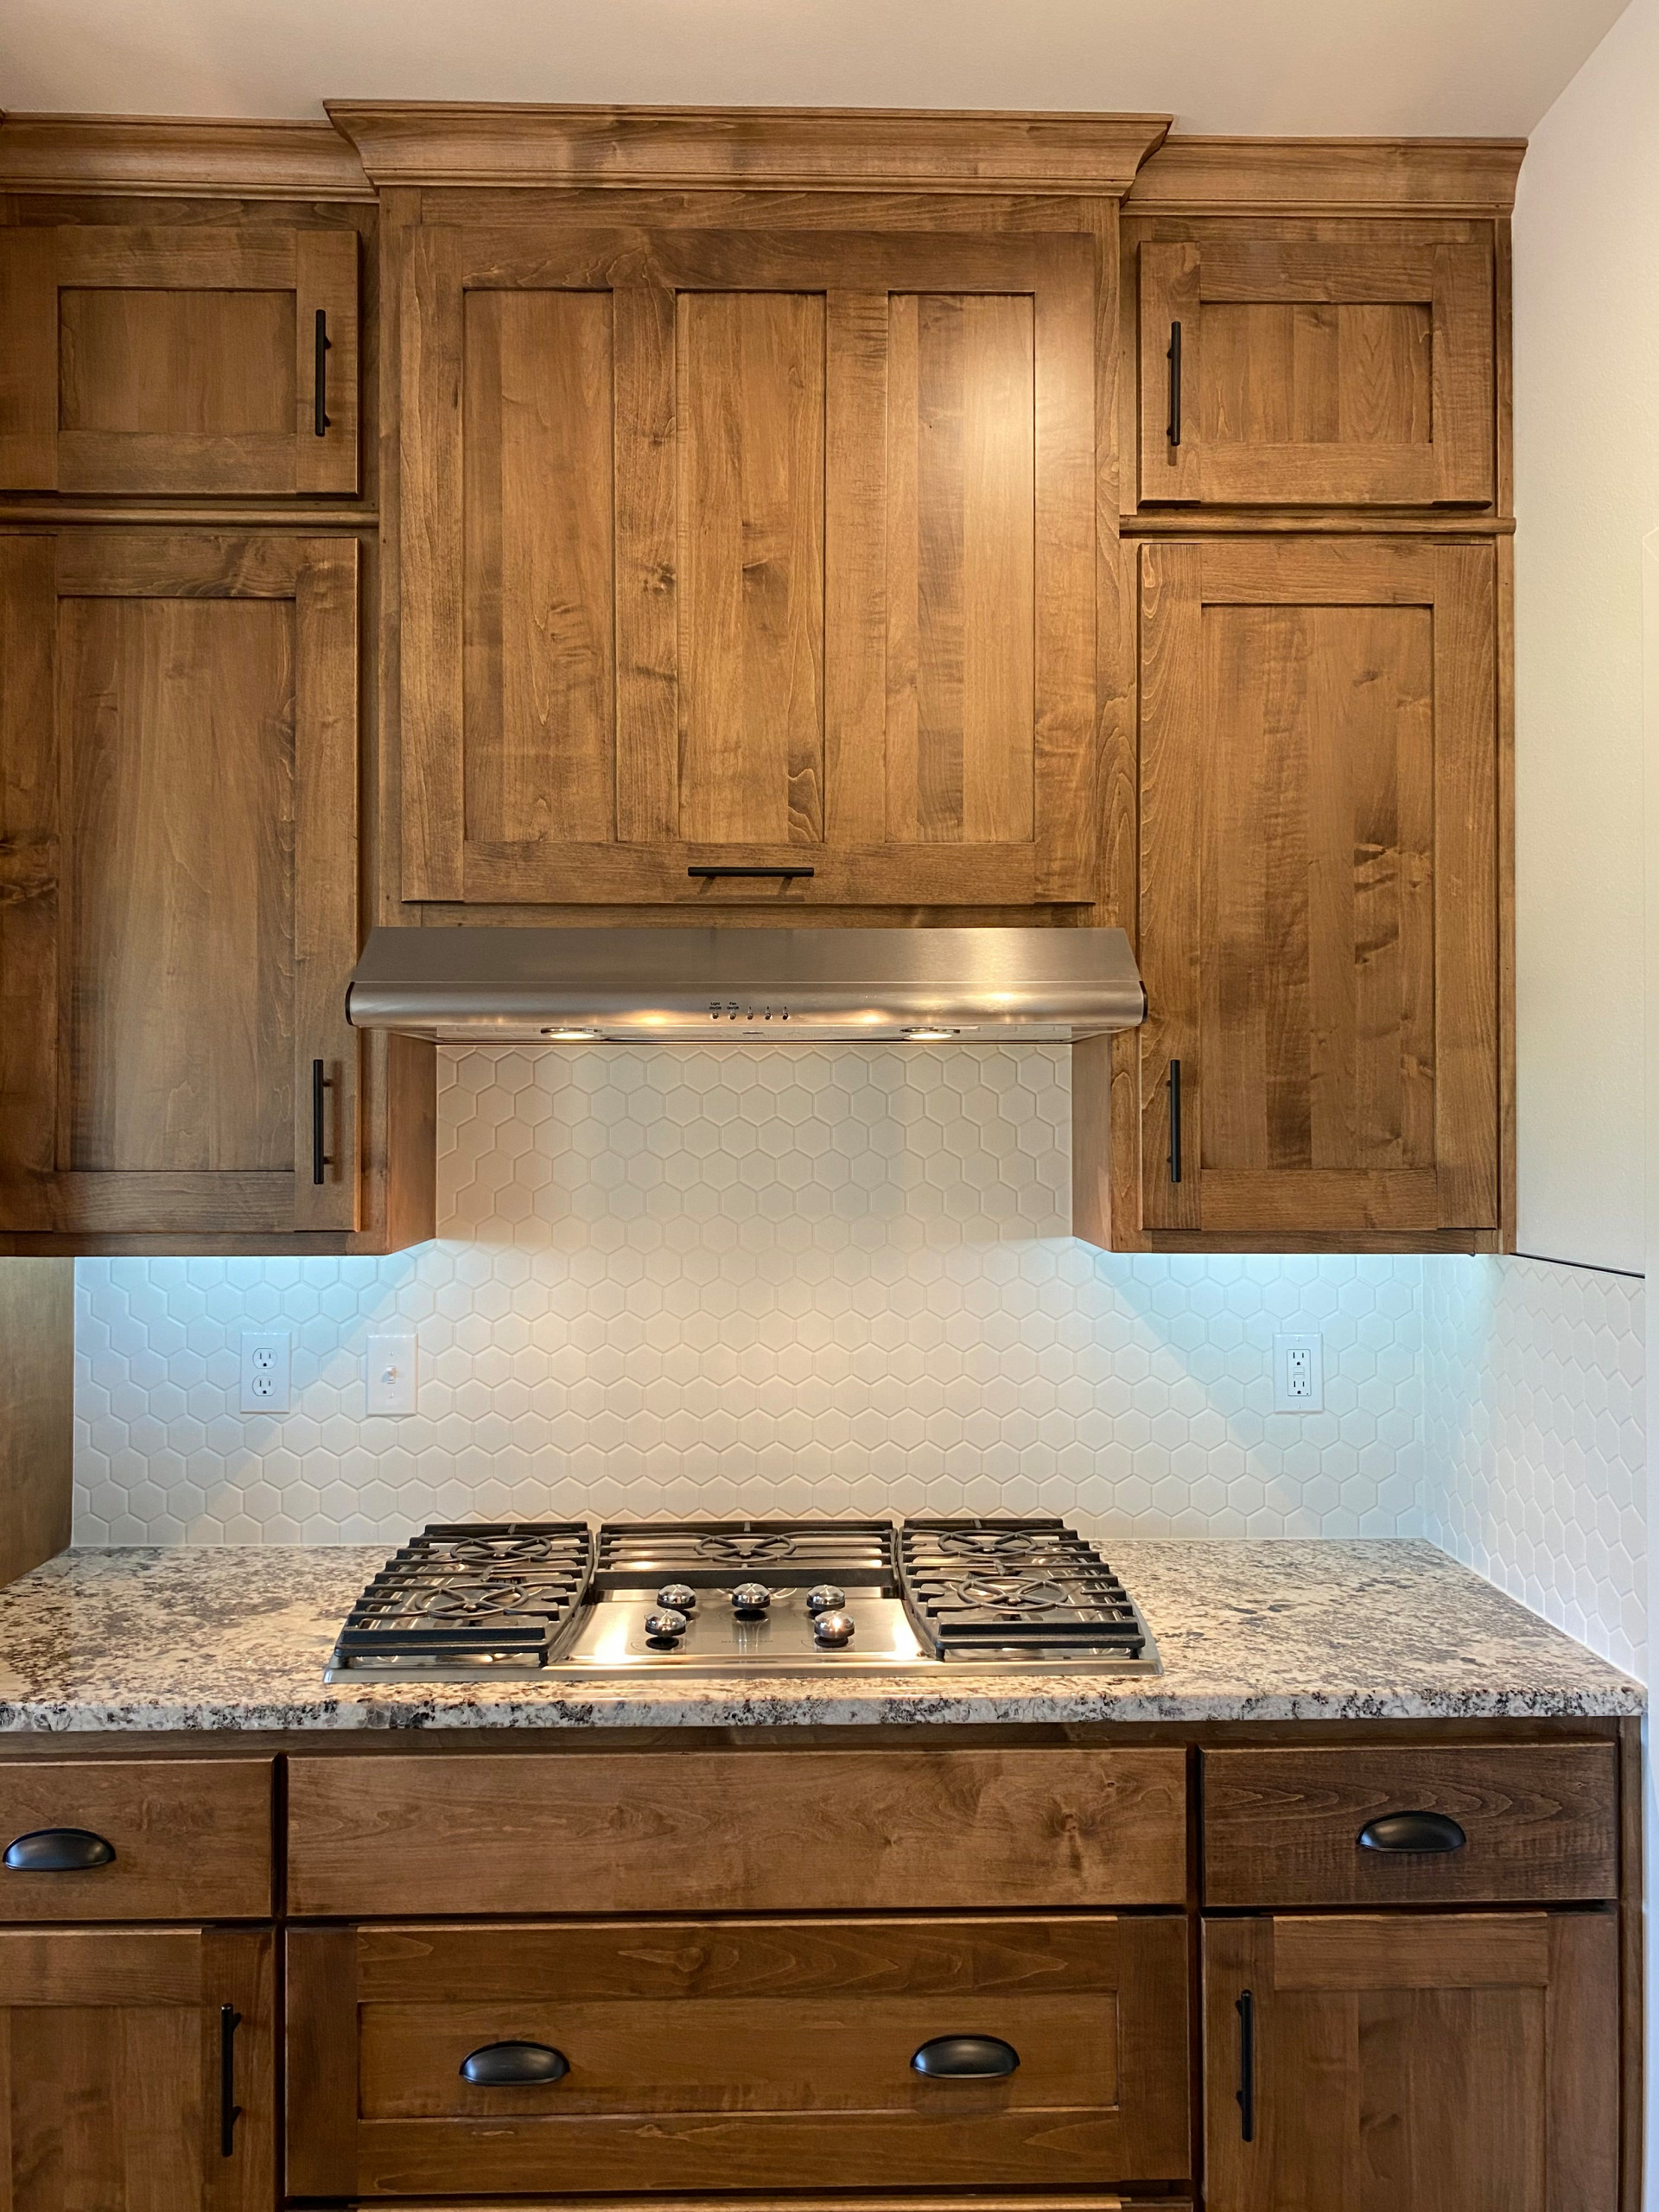 Custom kitchen cabinetry with gas stove top and brushed nickel exhaust vent